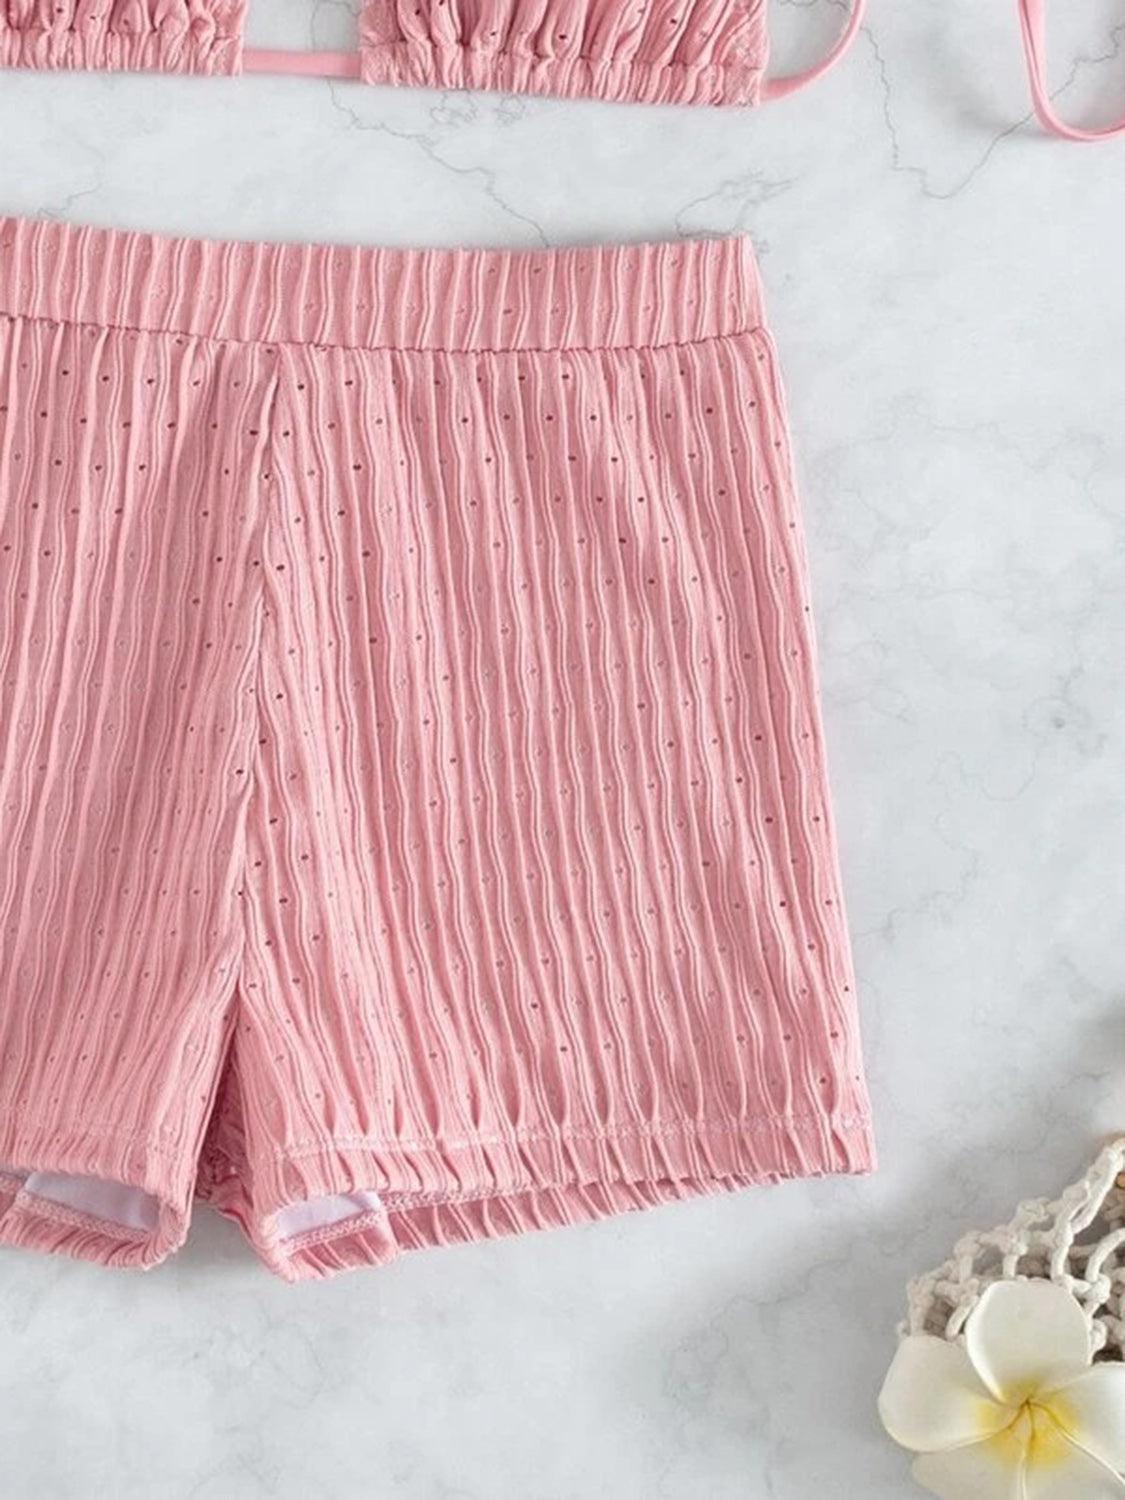 a pair of pink shorts next to a white flower